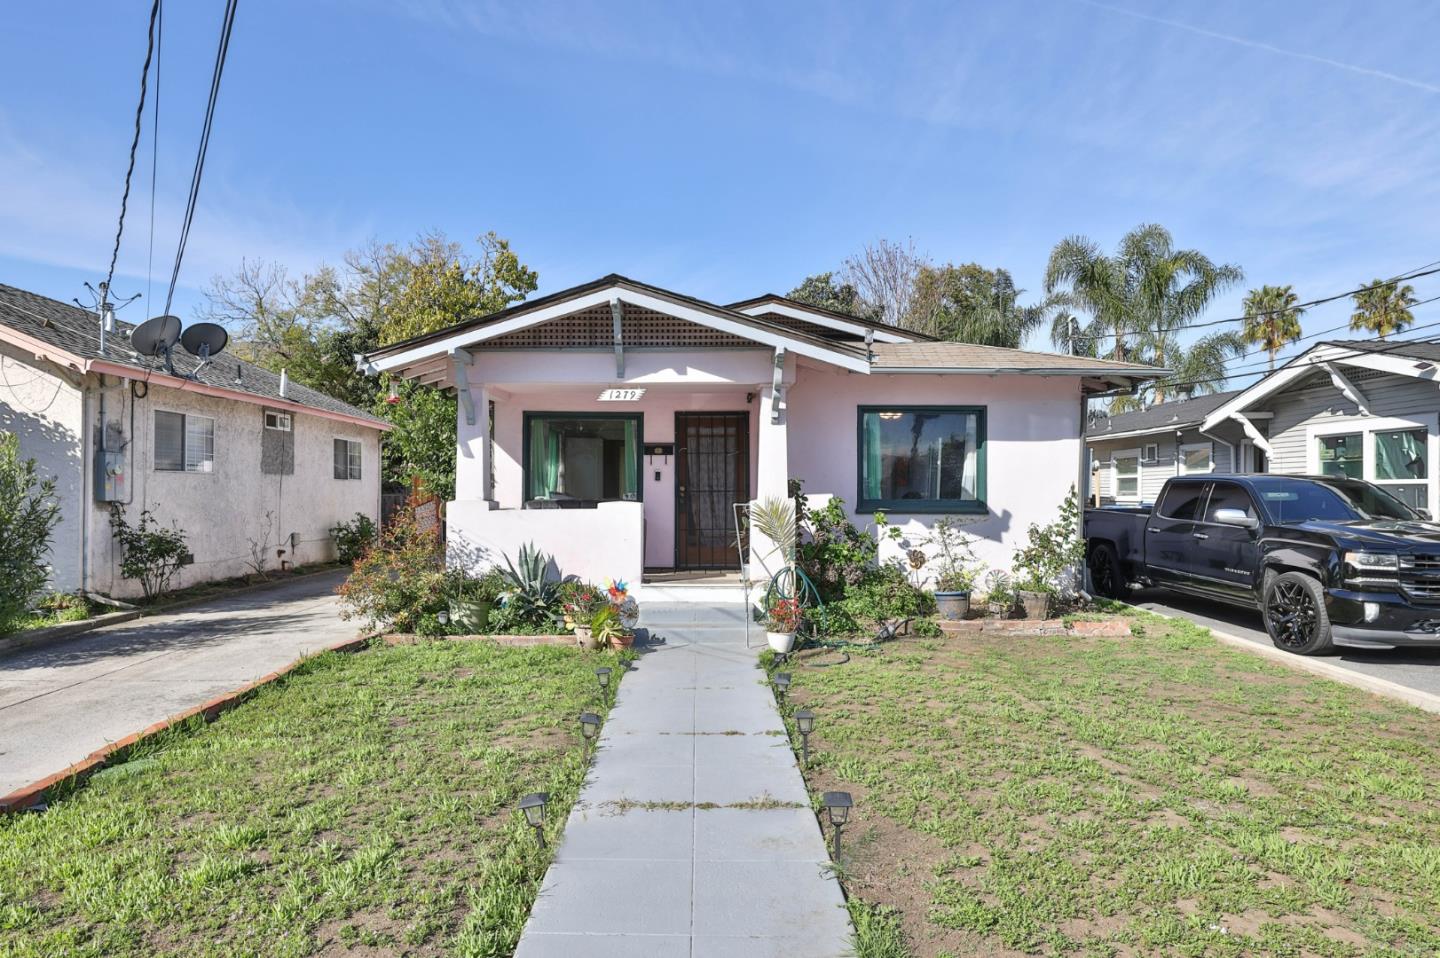 Photo of 1279 Palm St in San Jose, CA